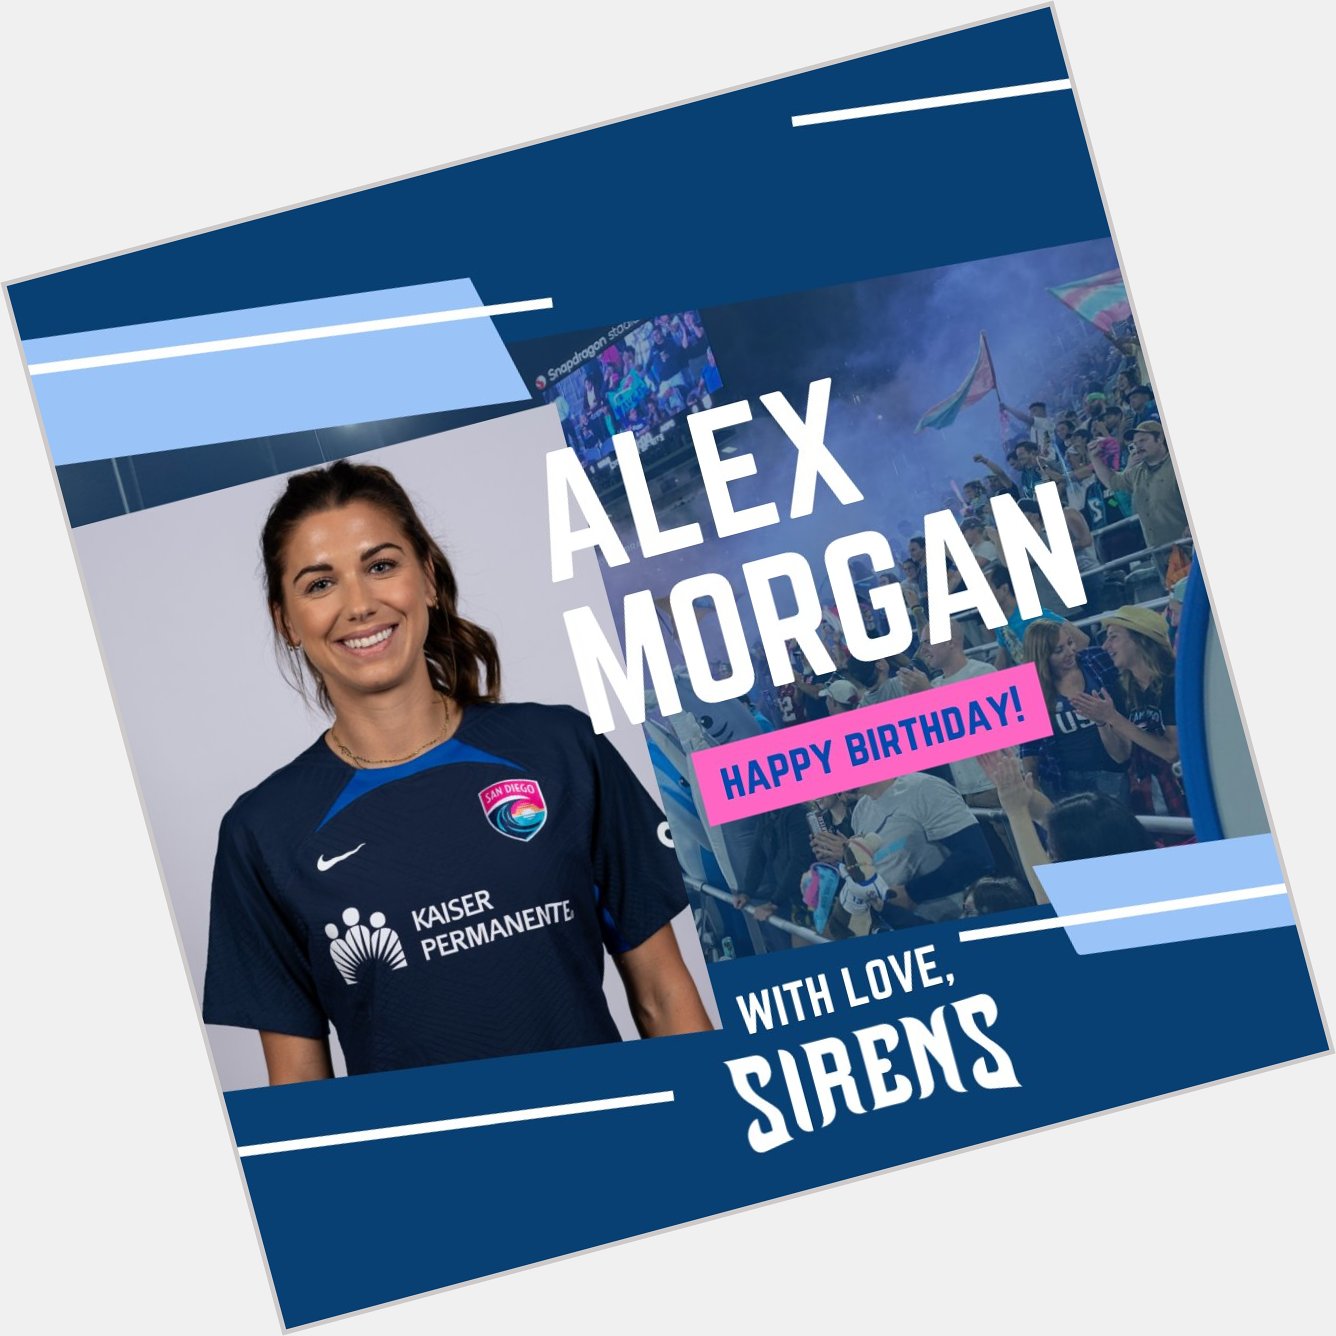 Happy birthday to Alex Morgan!
Share your birthday wishes for Alex here!  